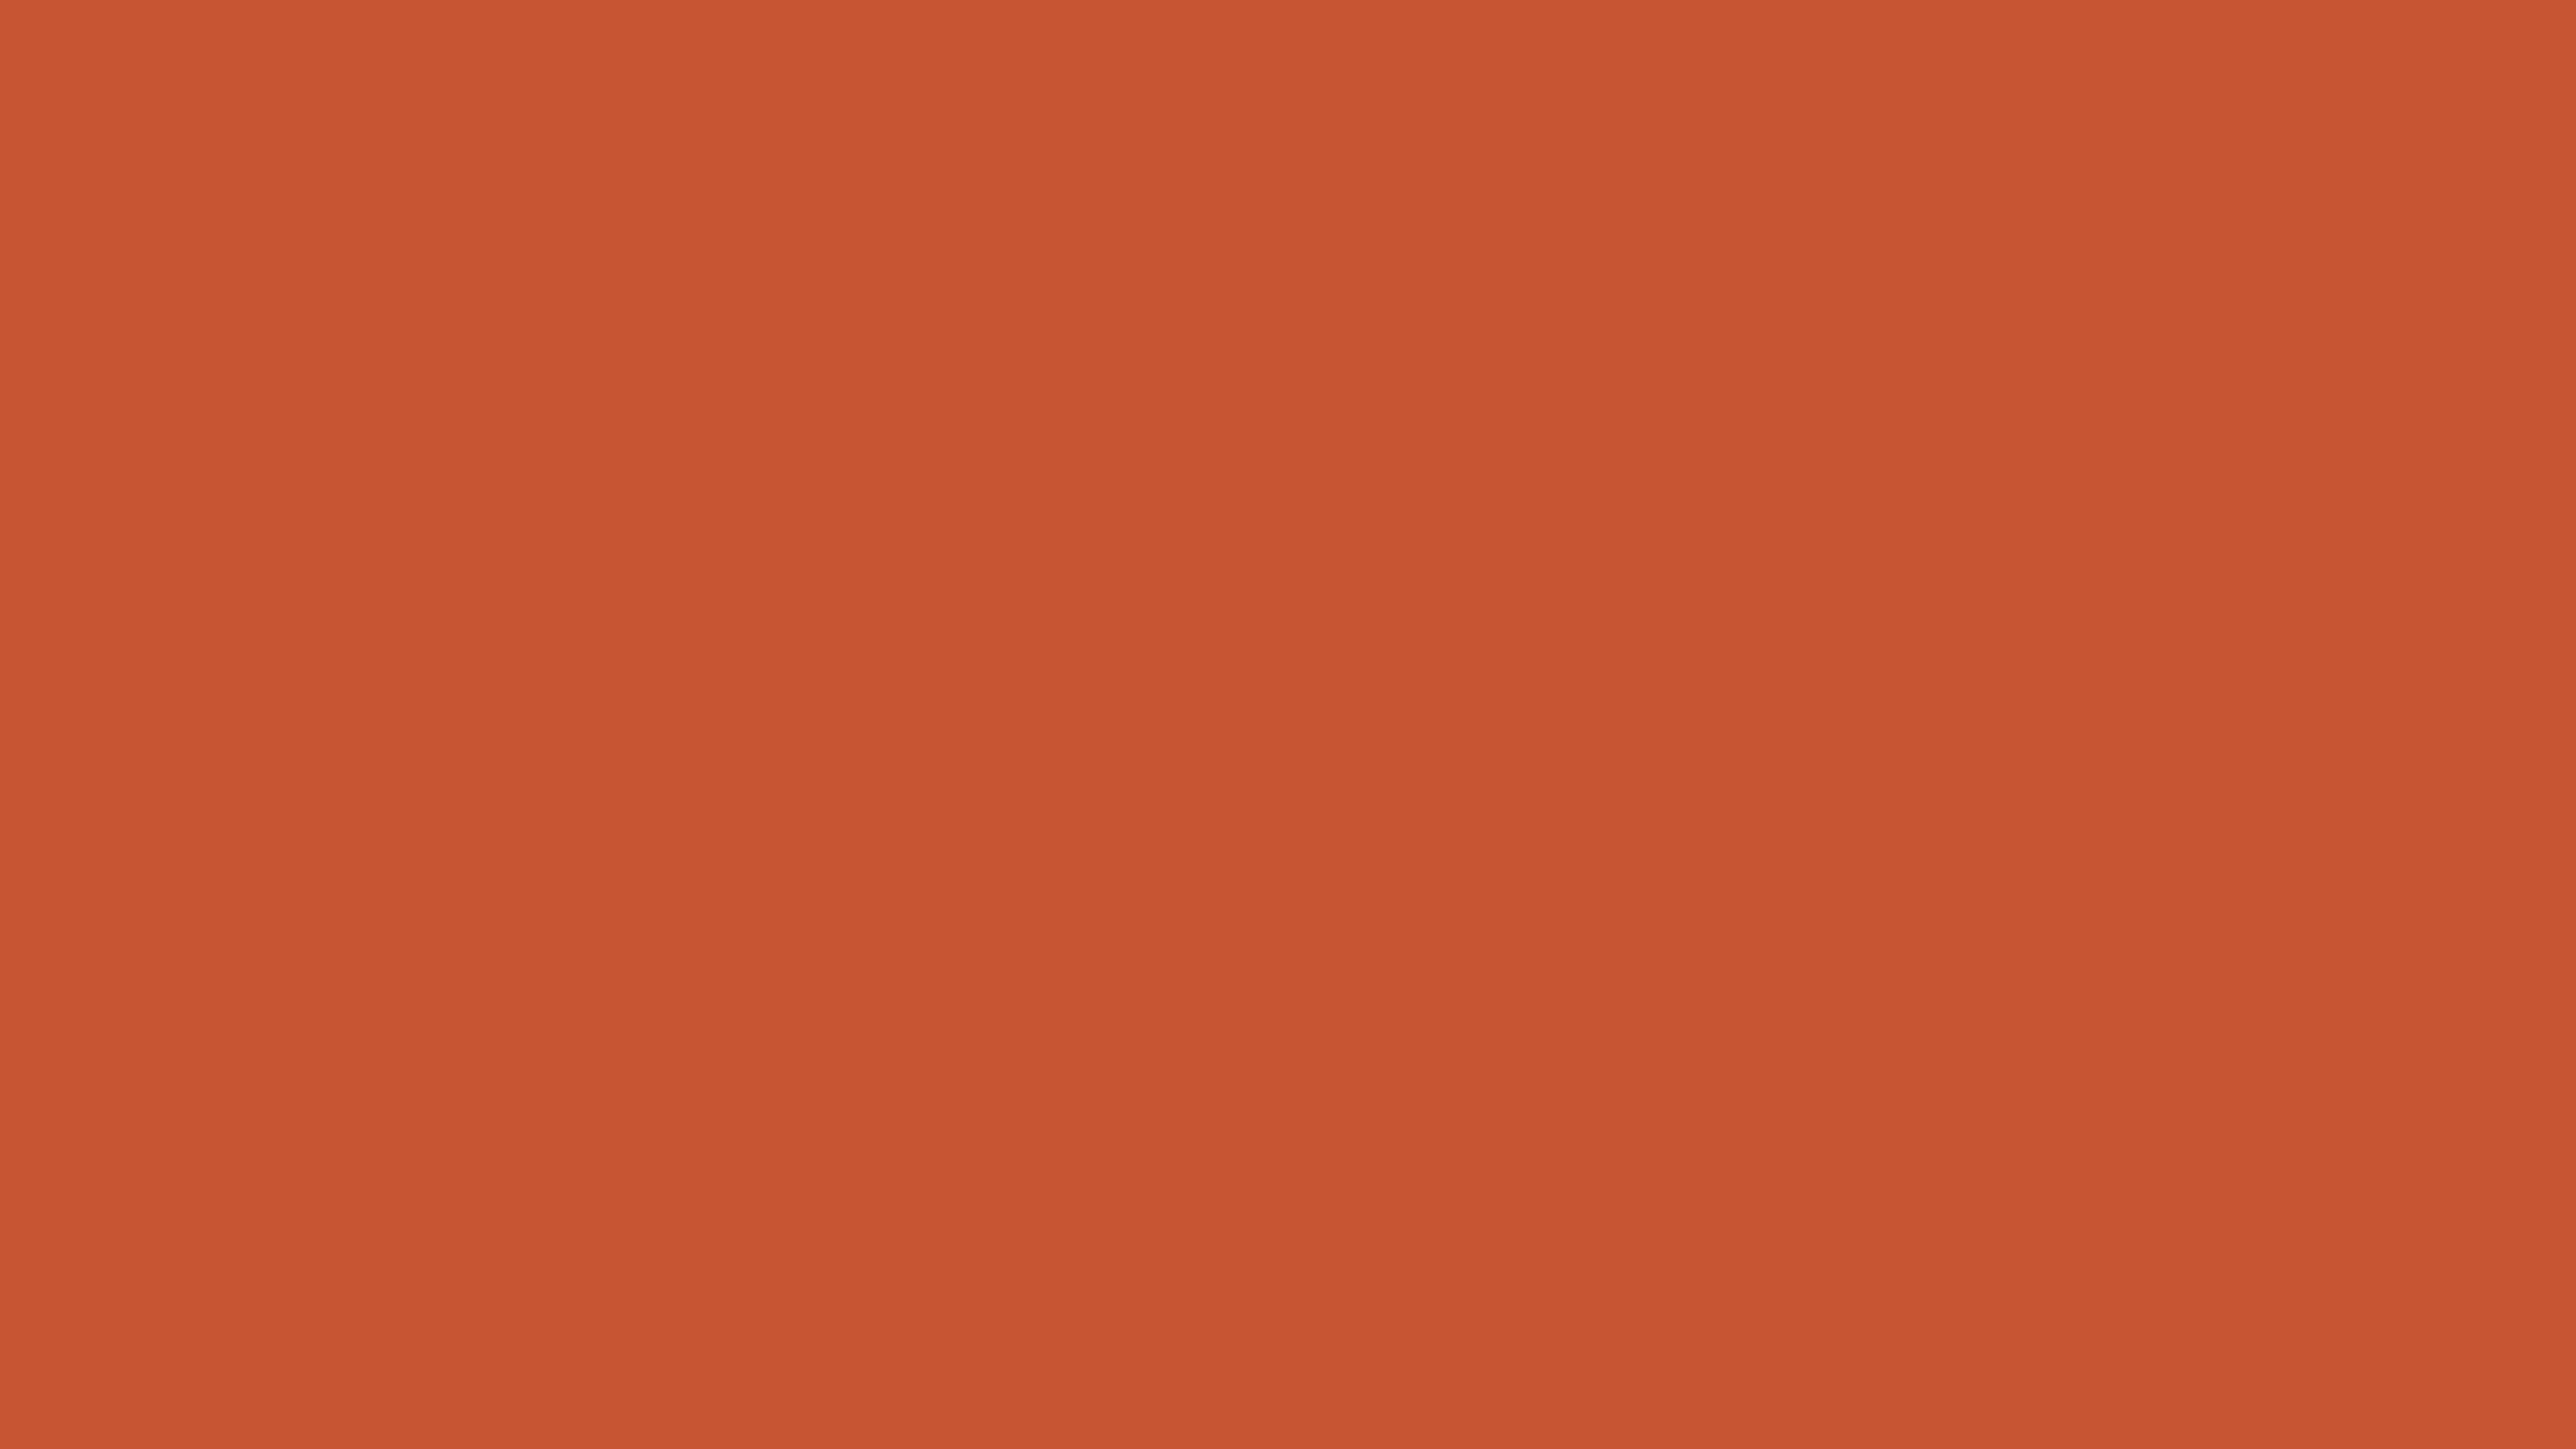 Spicy Tomato Solid Color Background Image | Free Image Generator